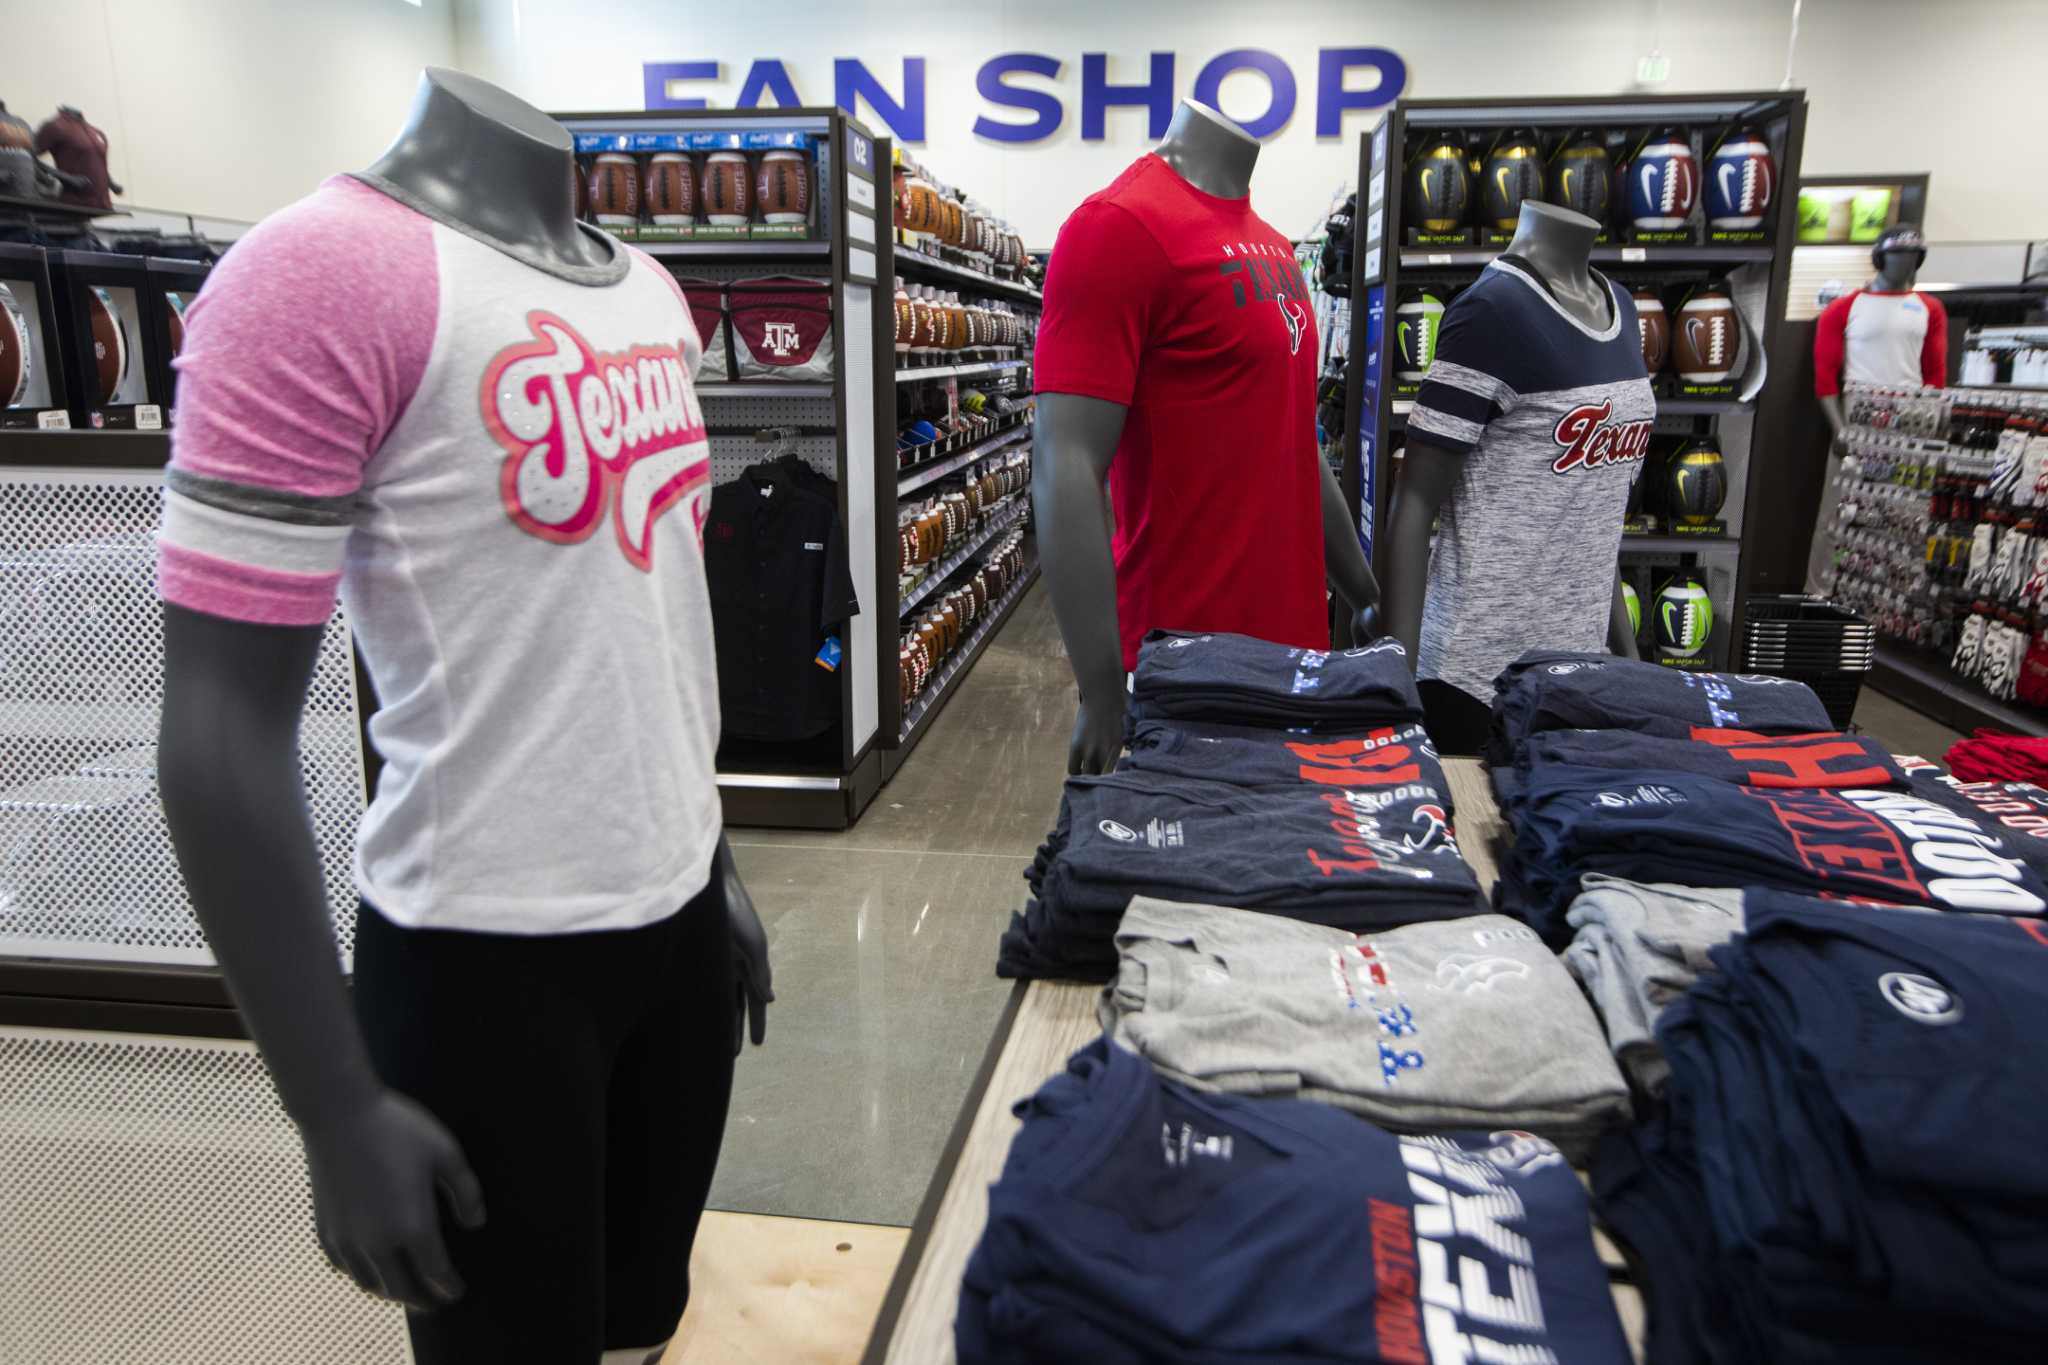 Academy Sports and Outdoors opens for fans to buy Astros